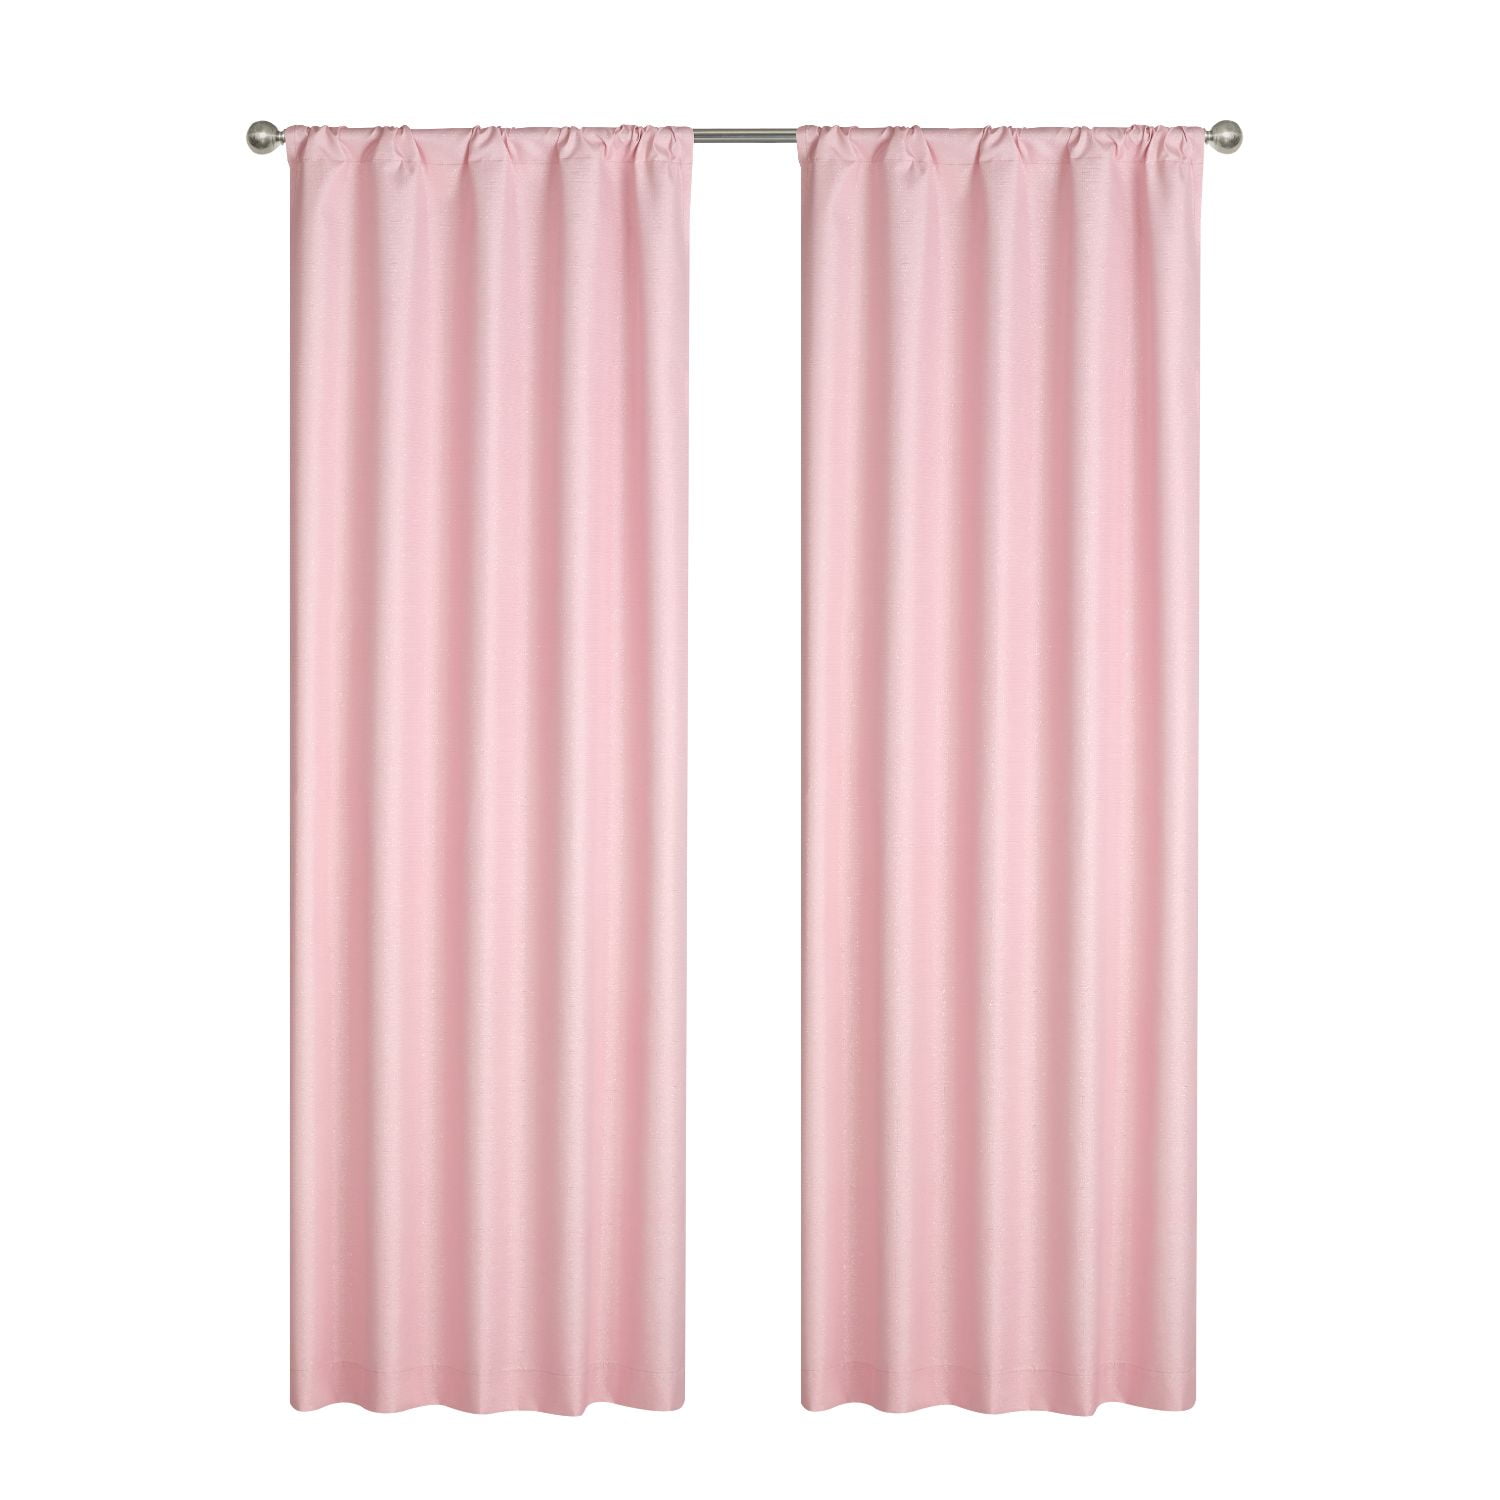 Your Zone Kids Solid Sparkle Room Darkening Curtains, Single Panel, 37 in W x 84 in L, Pink